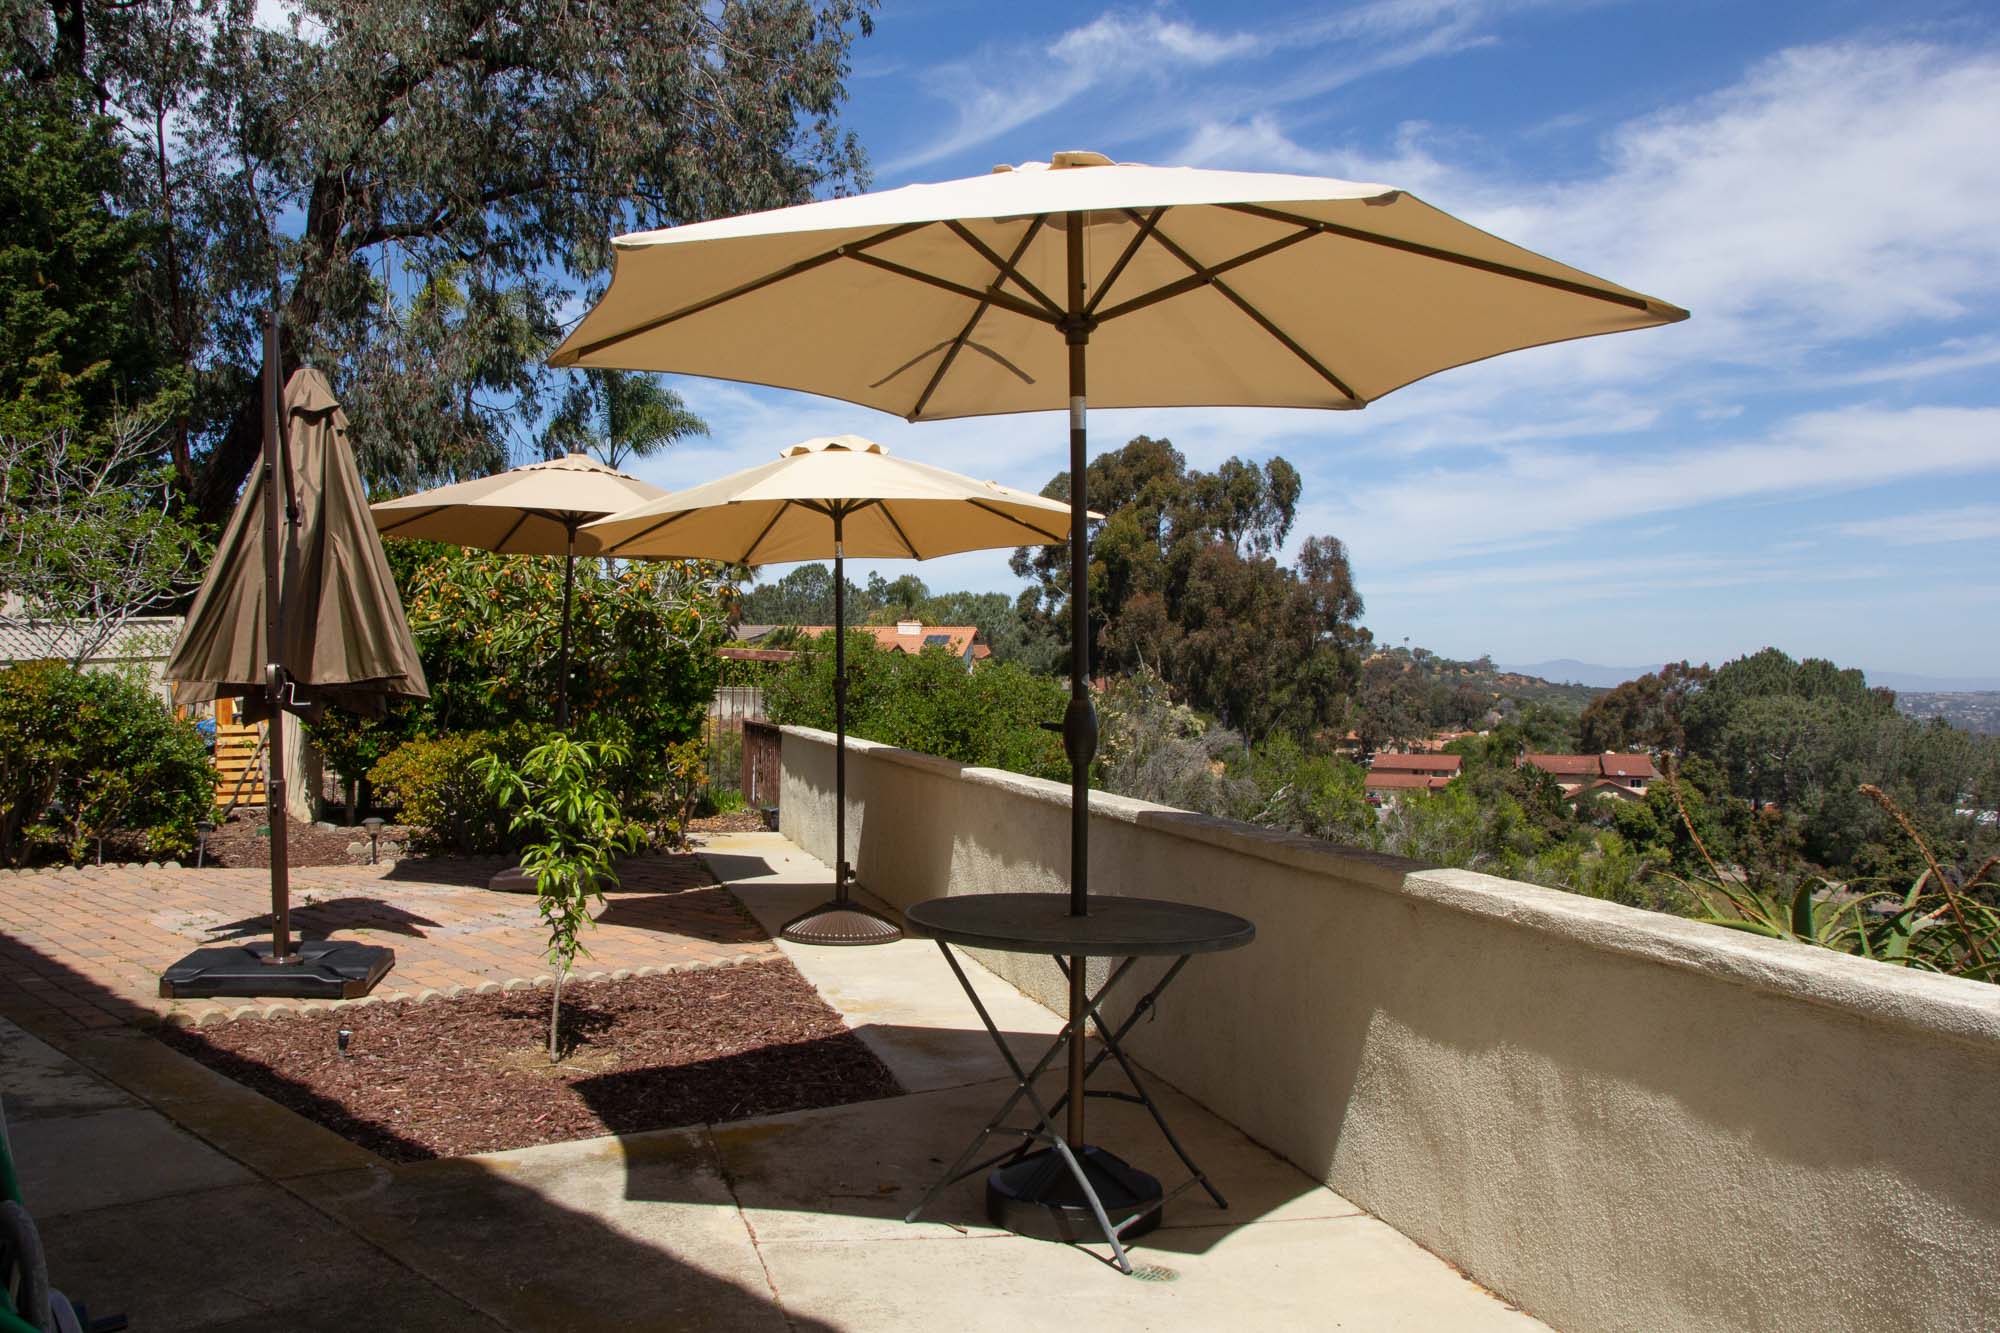 The Best Patio Umbrellas And Stands Of, Best Patio Umbrella For Sun Protection